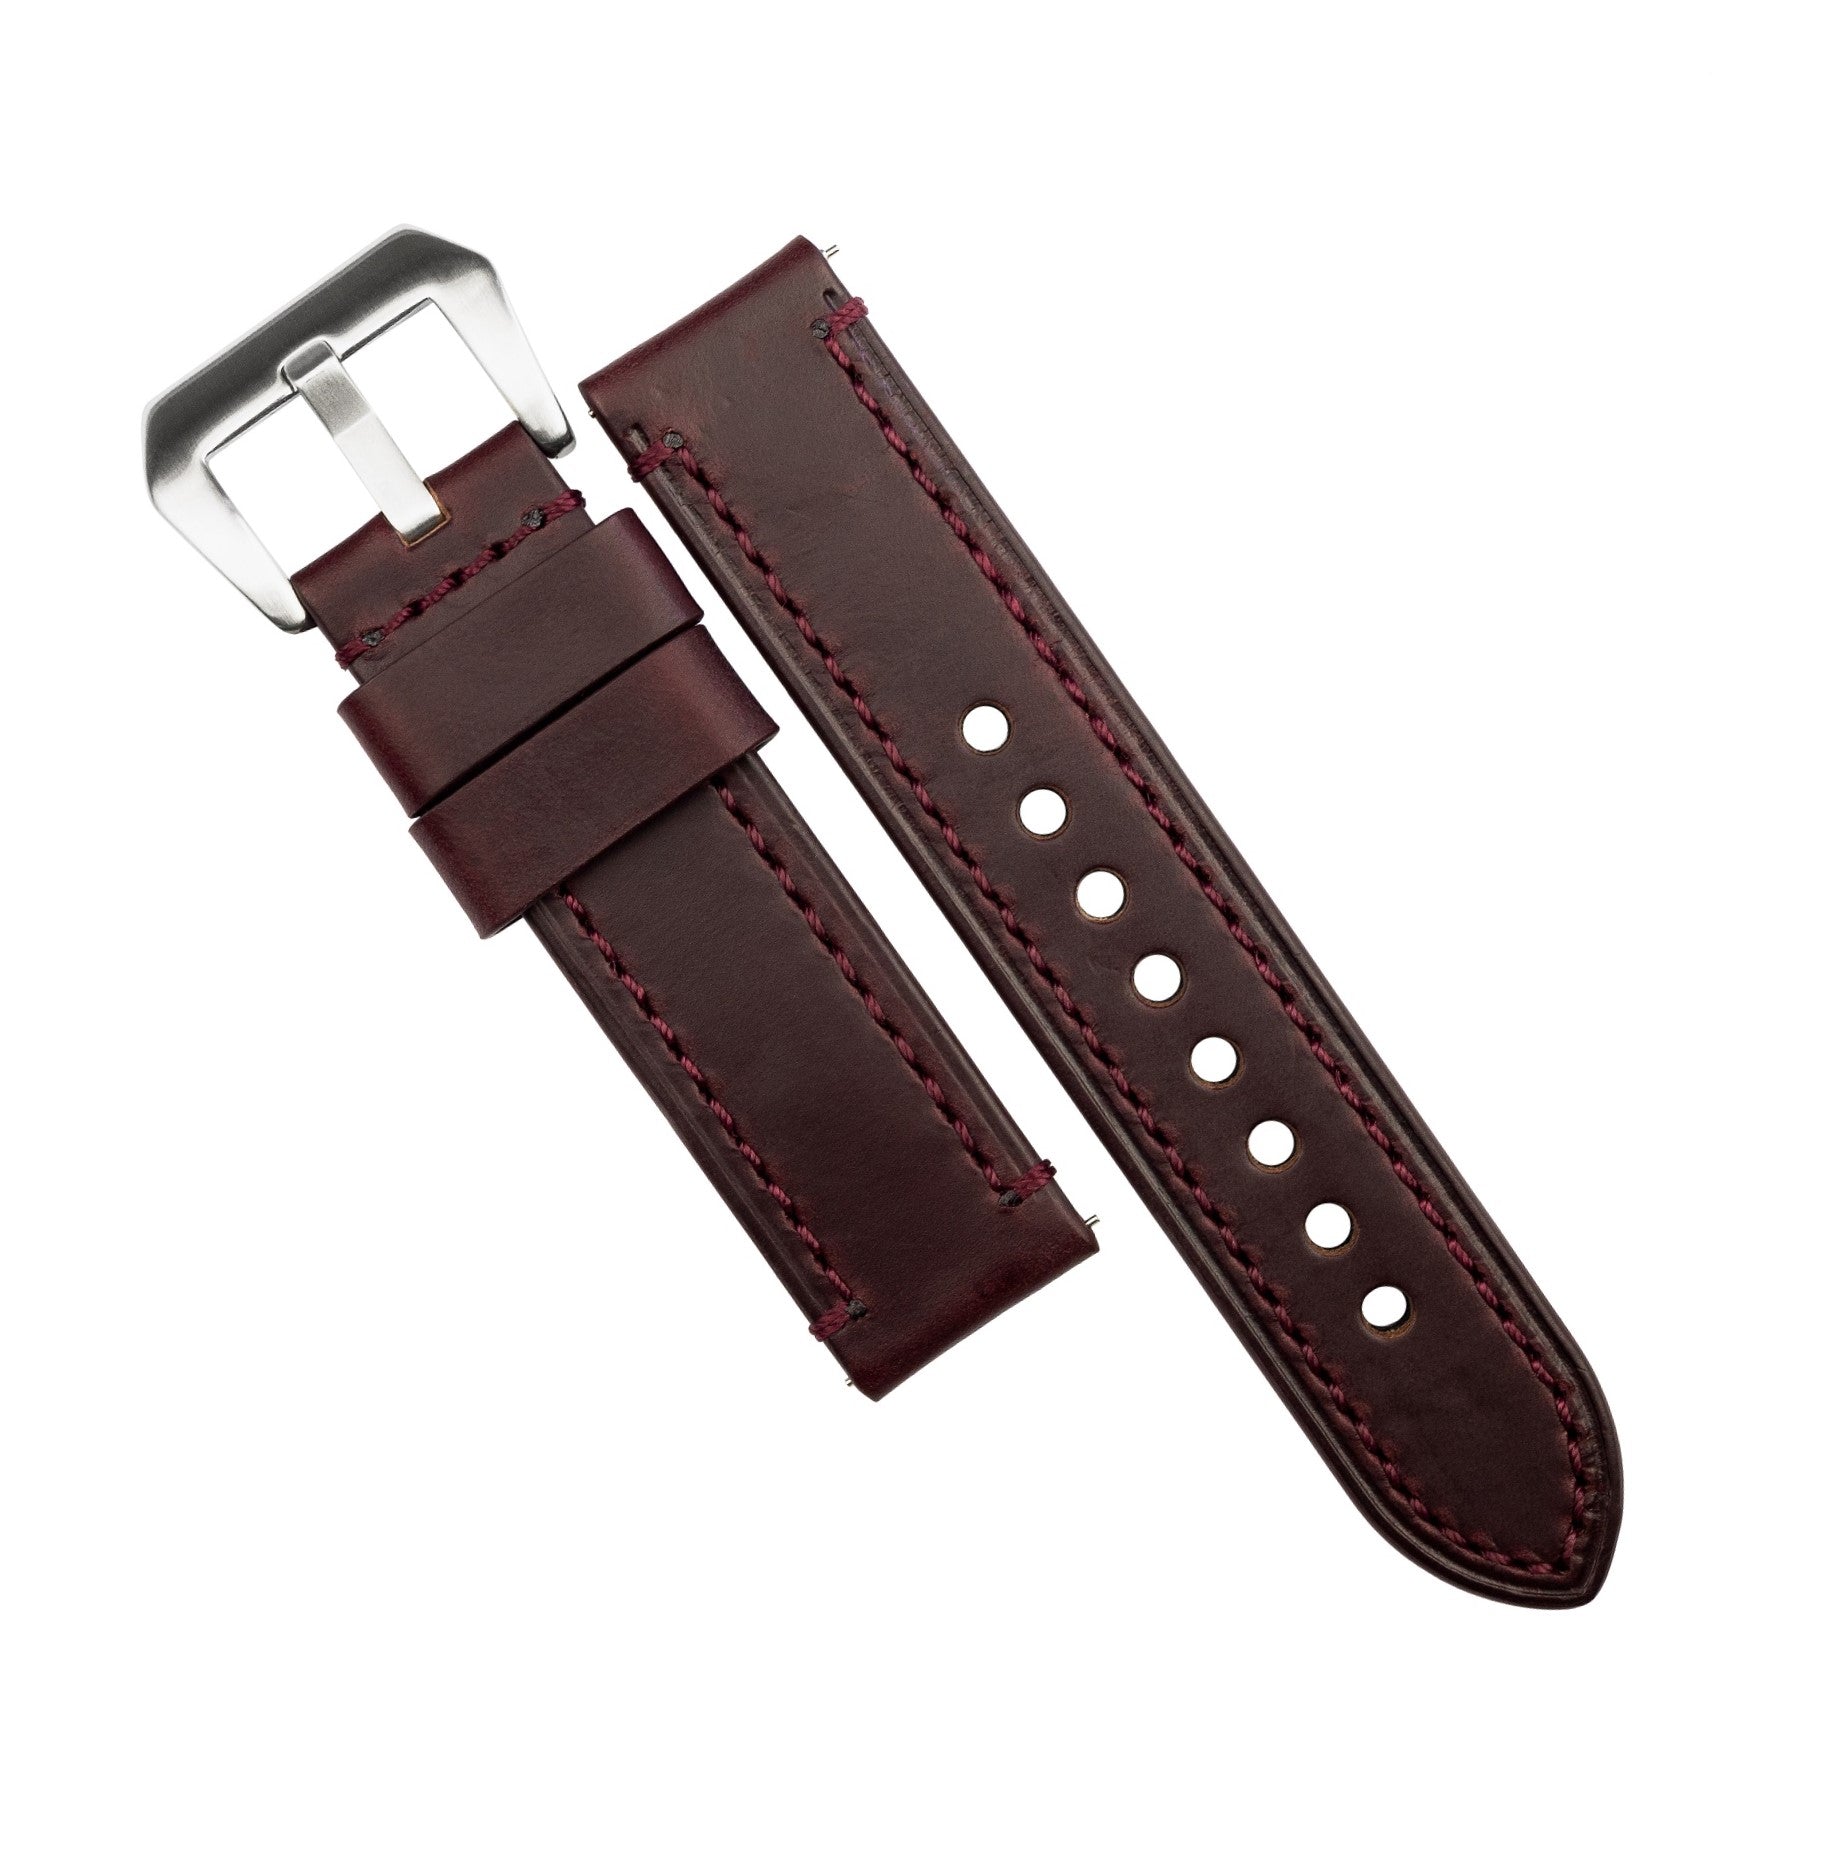 N2W Ammo Horween Leather Strap in Chromexcel® Burgundy (20mm) - Pre Order - Nomad Watch Works SG